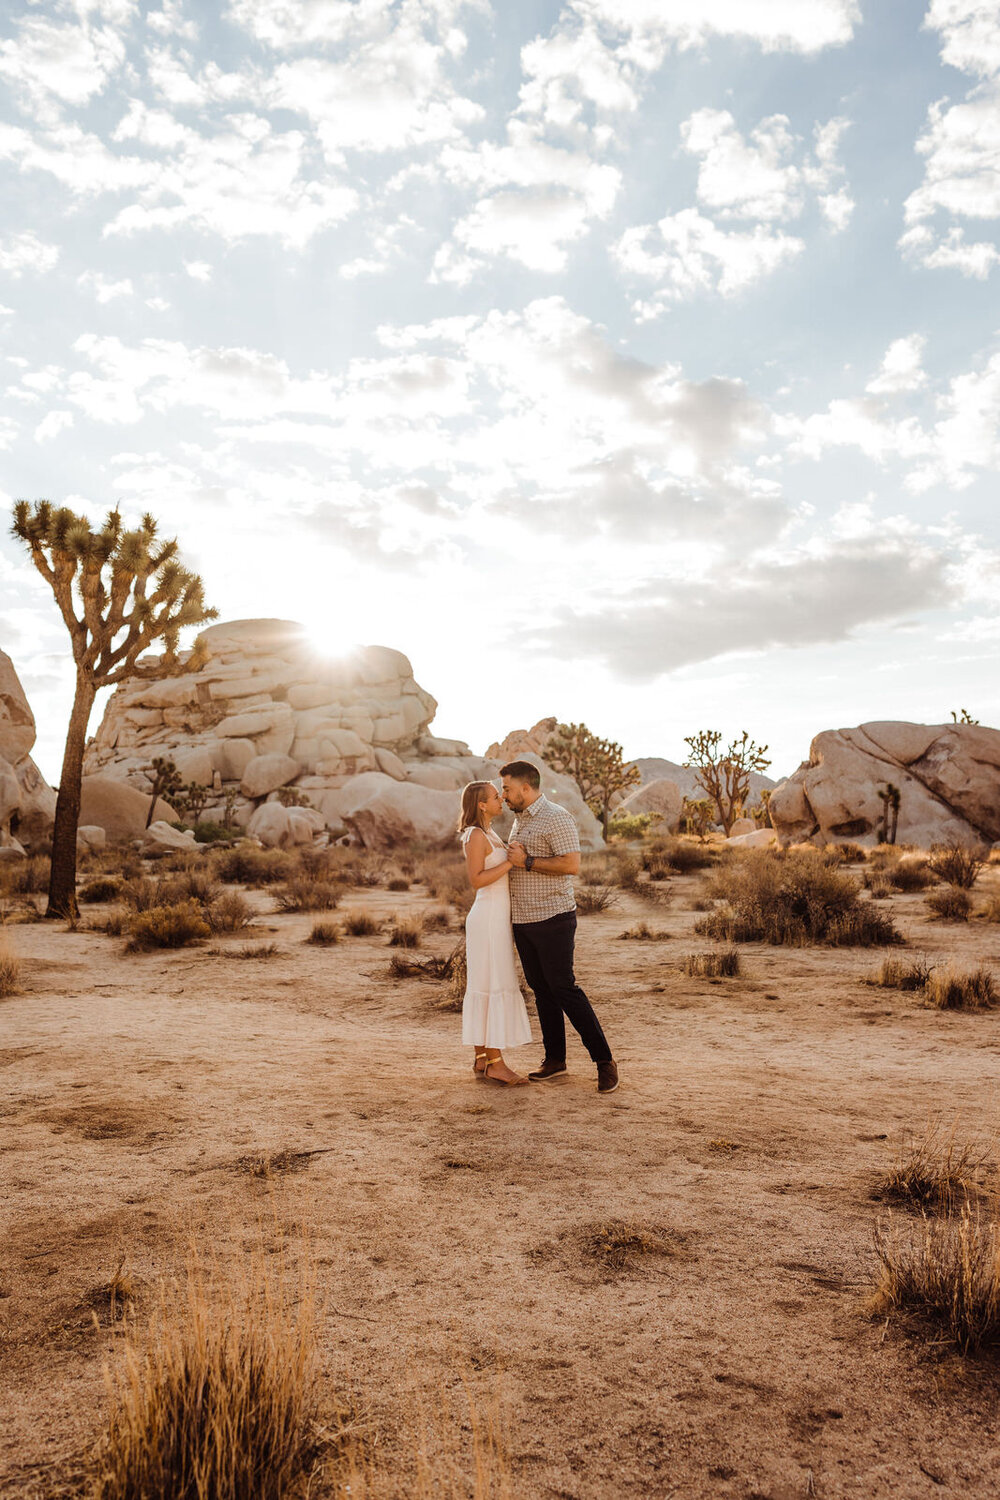 Sunrise Engagement Session in Joshua Tree - Neutral Photoshoot Outfits - Dark and Moody Engagement Photos by adventurous Joshua Tree Wedding and Elopement Photographer Kept Record | www.keptrecord.com